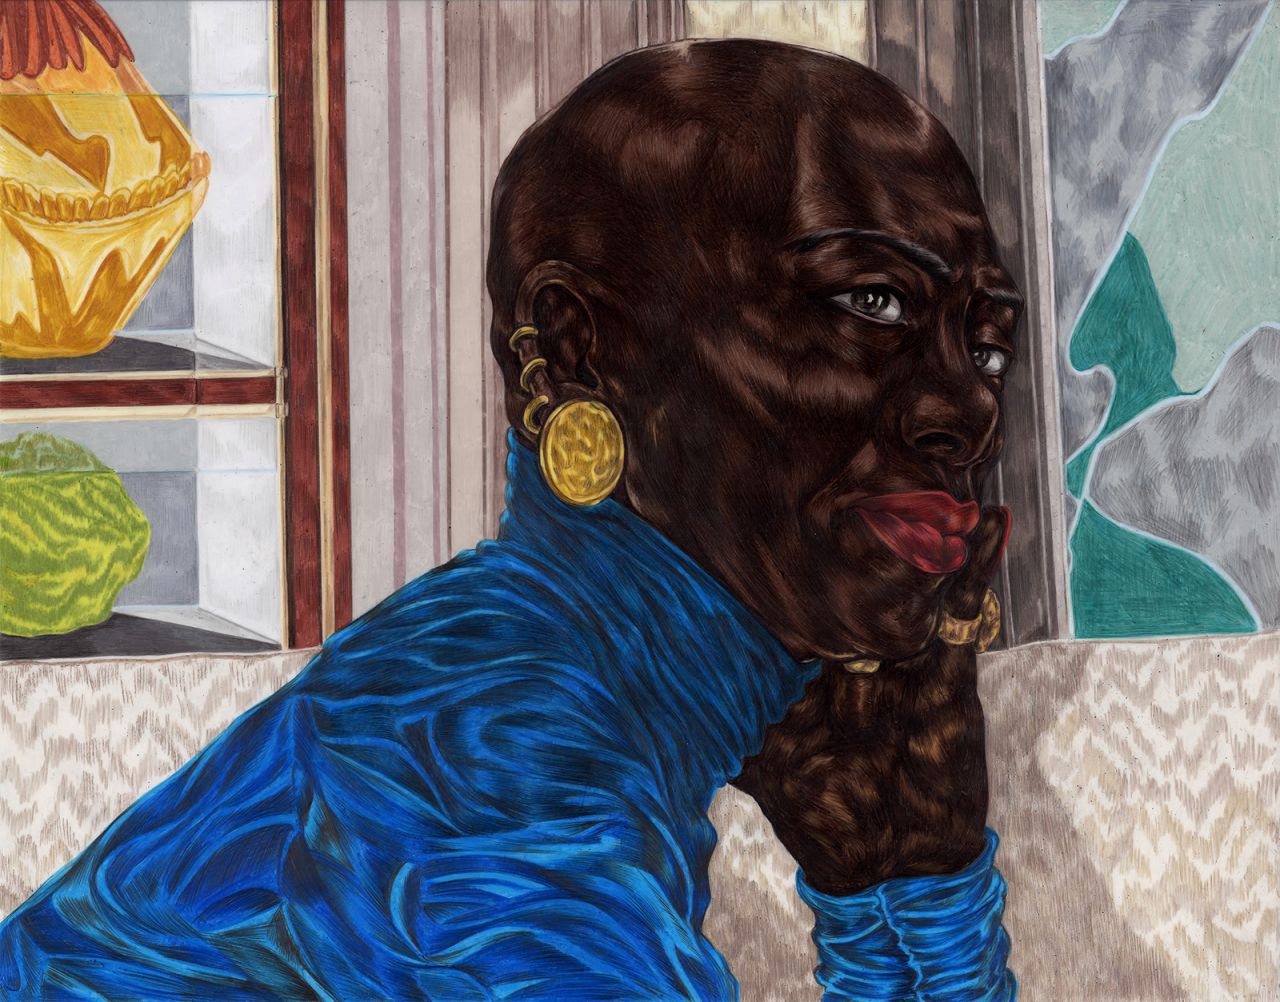 Ojih Odutola is exhibiting new work, made during lockdown, at a virtual show for New York's Jack Shainman Gallery.